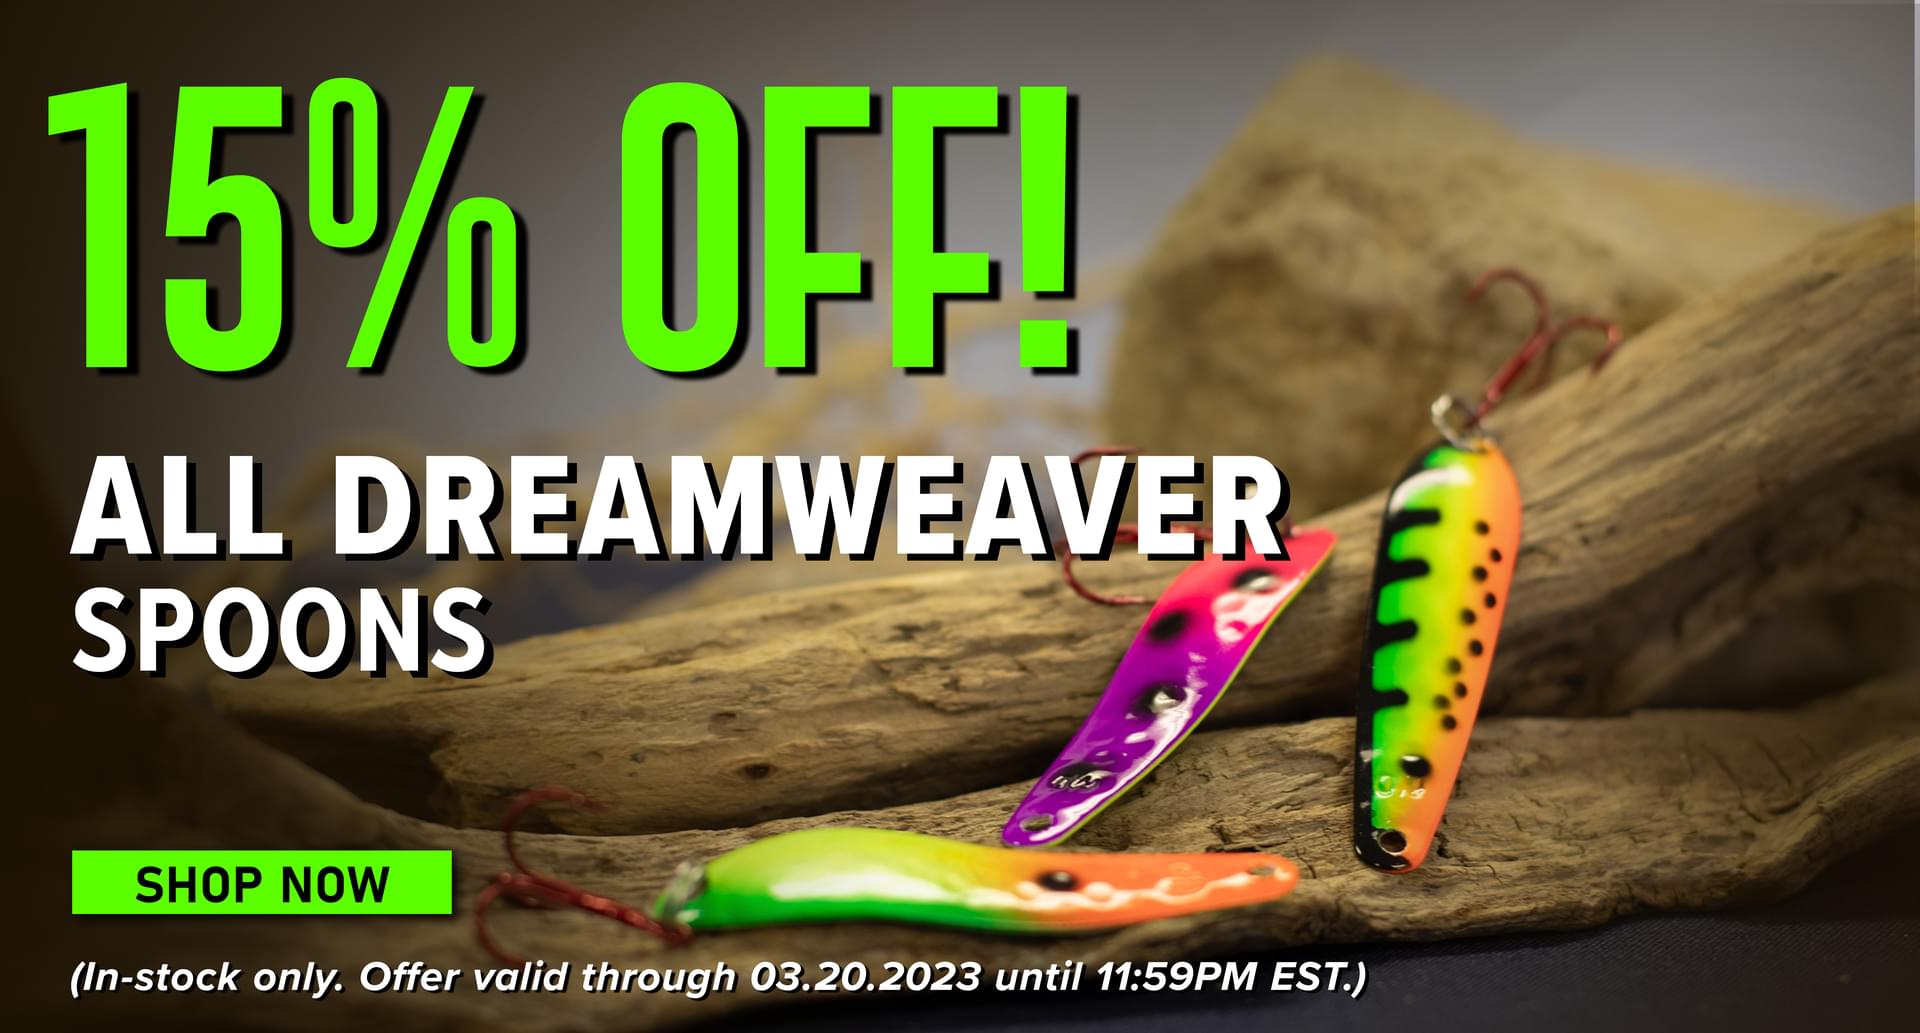 15% Off! All Dreamweaver Spoons  Shop Now (In-stock only. Offer valid through 03.20.2023 until 11:59PM EST.)  L In-stock only. Offer valid through 03.20.2023 until 11:59PM EST. 